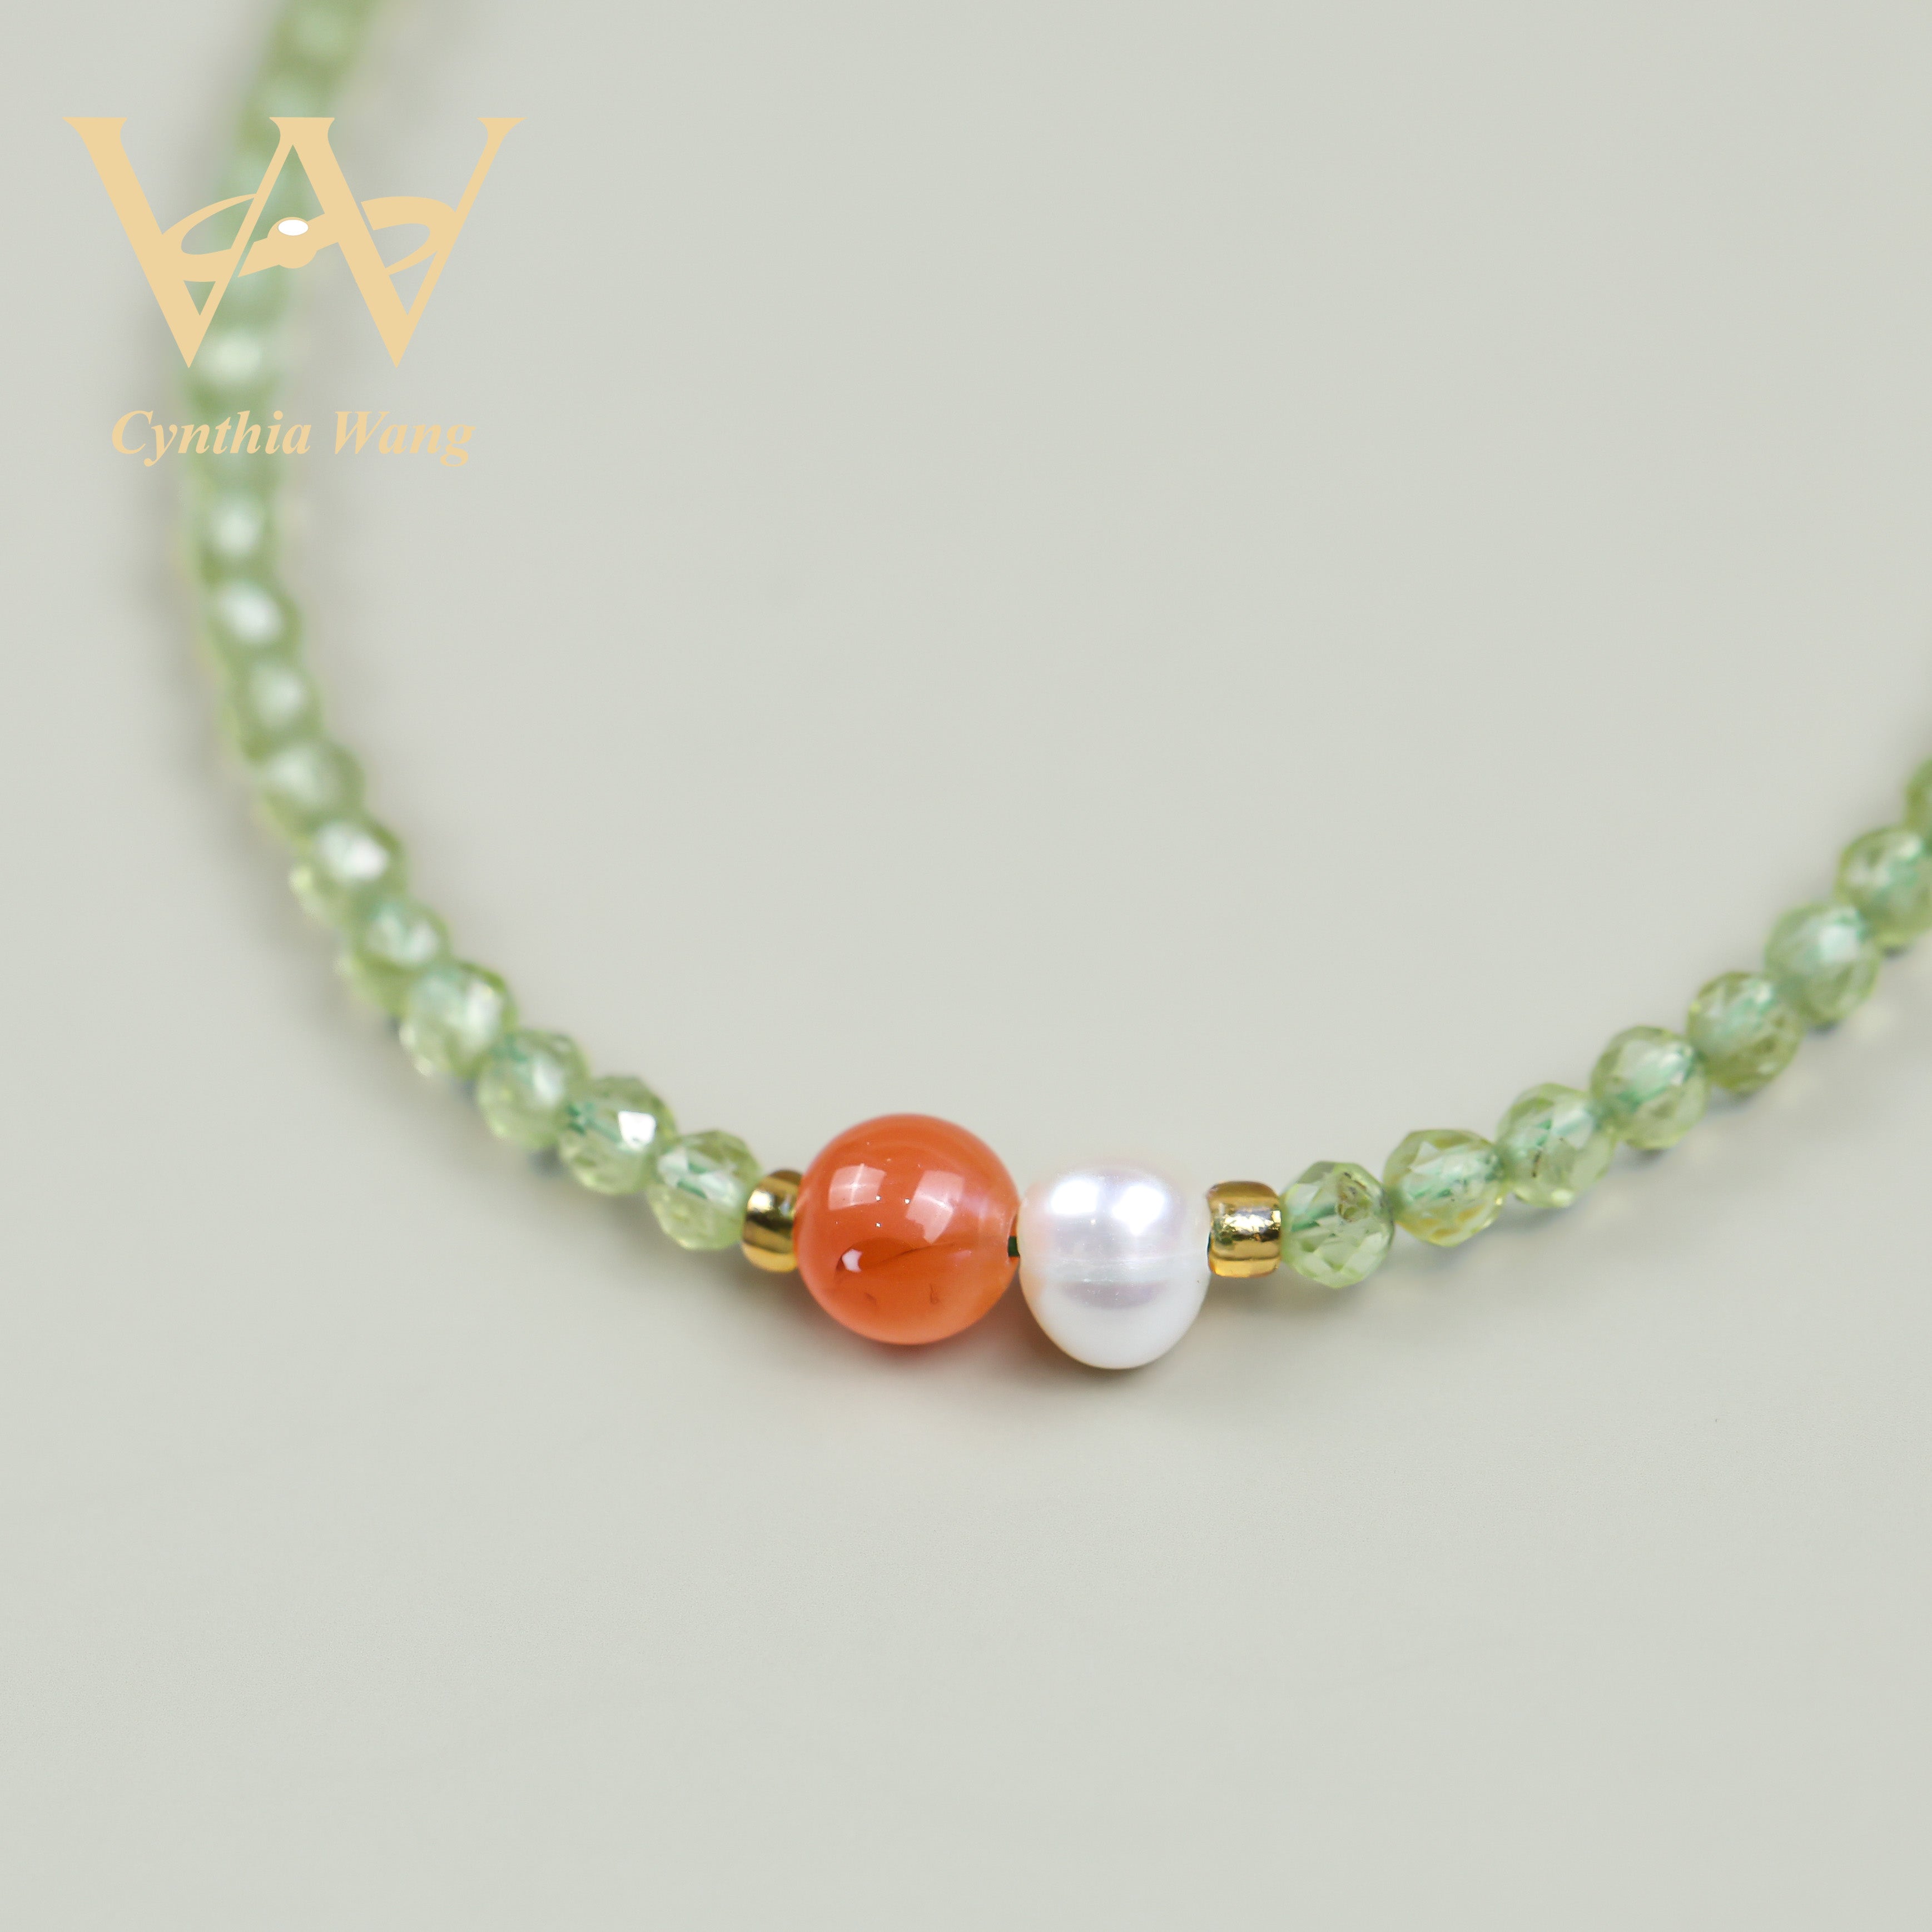 'The Code of the Forest' Peridot & Pearl Bracelet